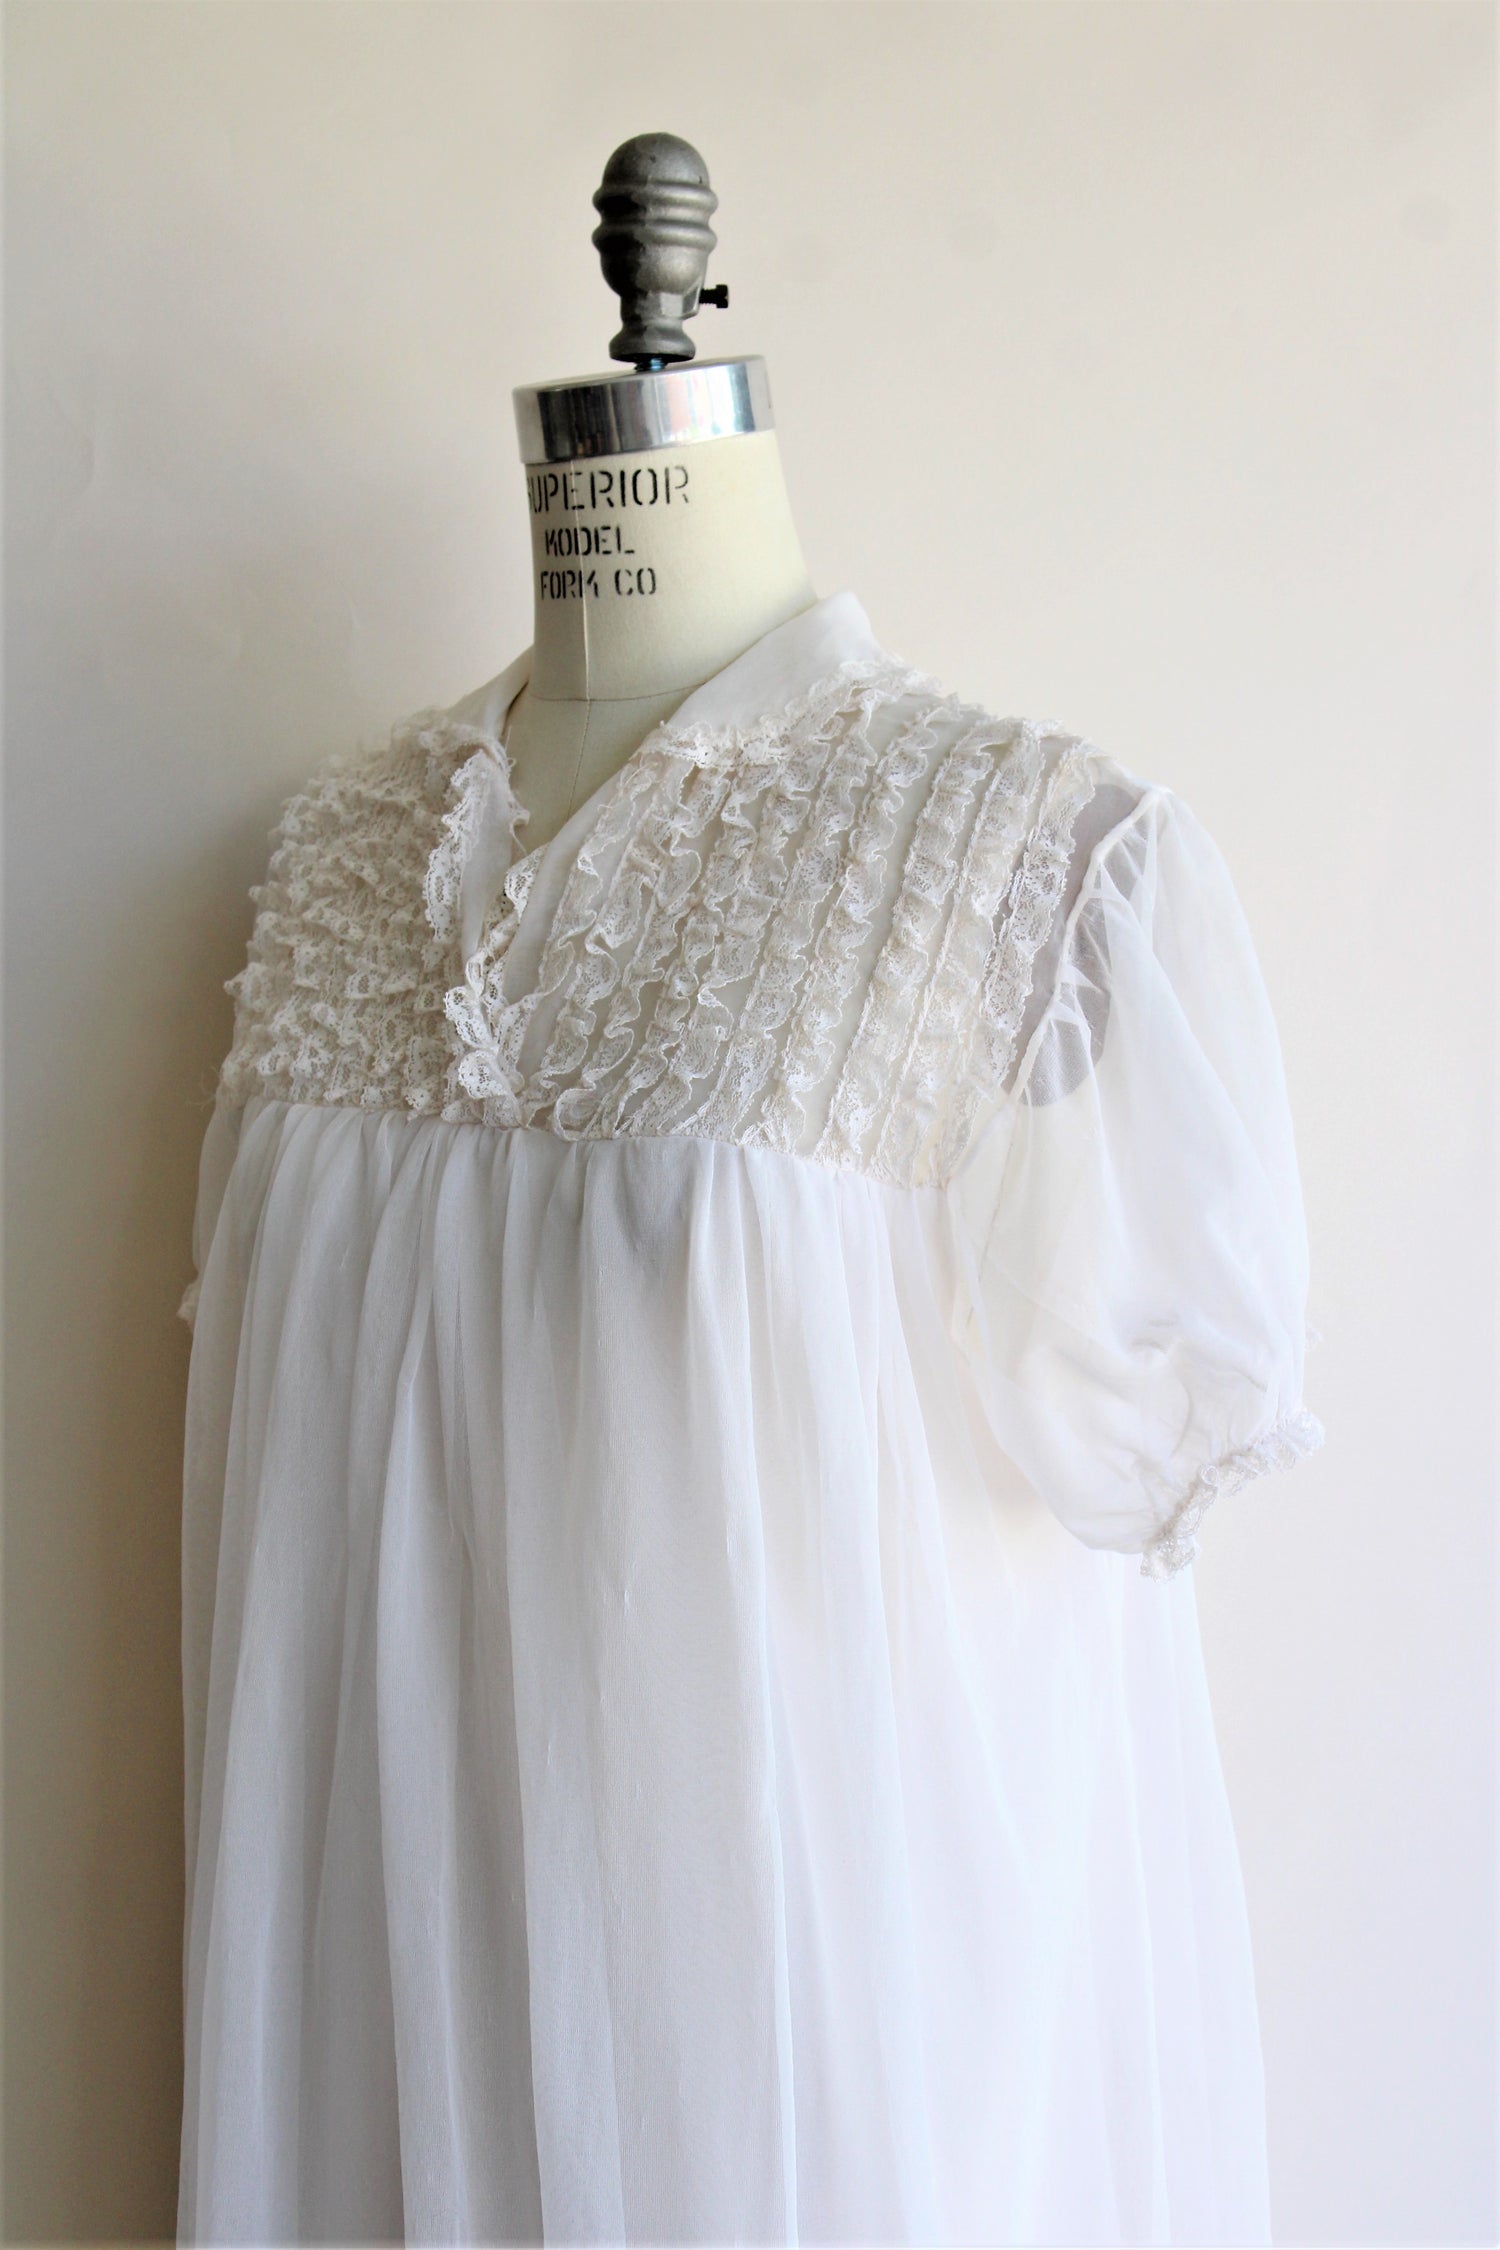 Vintage 1960s White Babydoll Nightie with Lace Trim#N# – Toadstool Farm ...